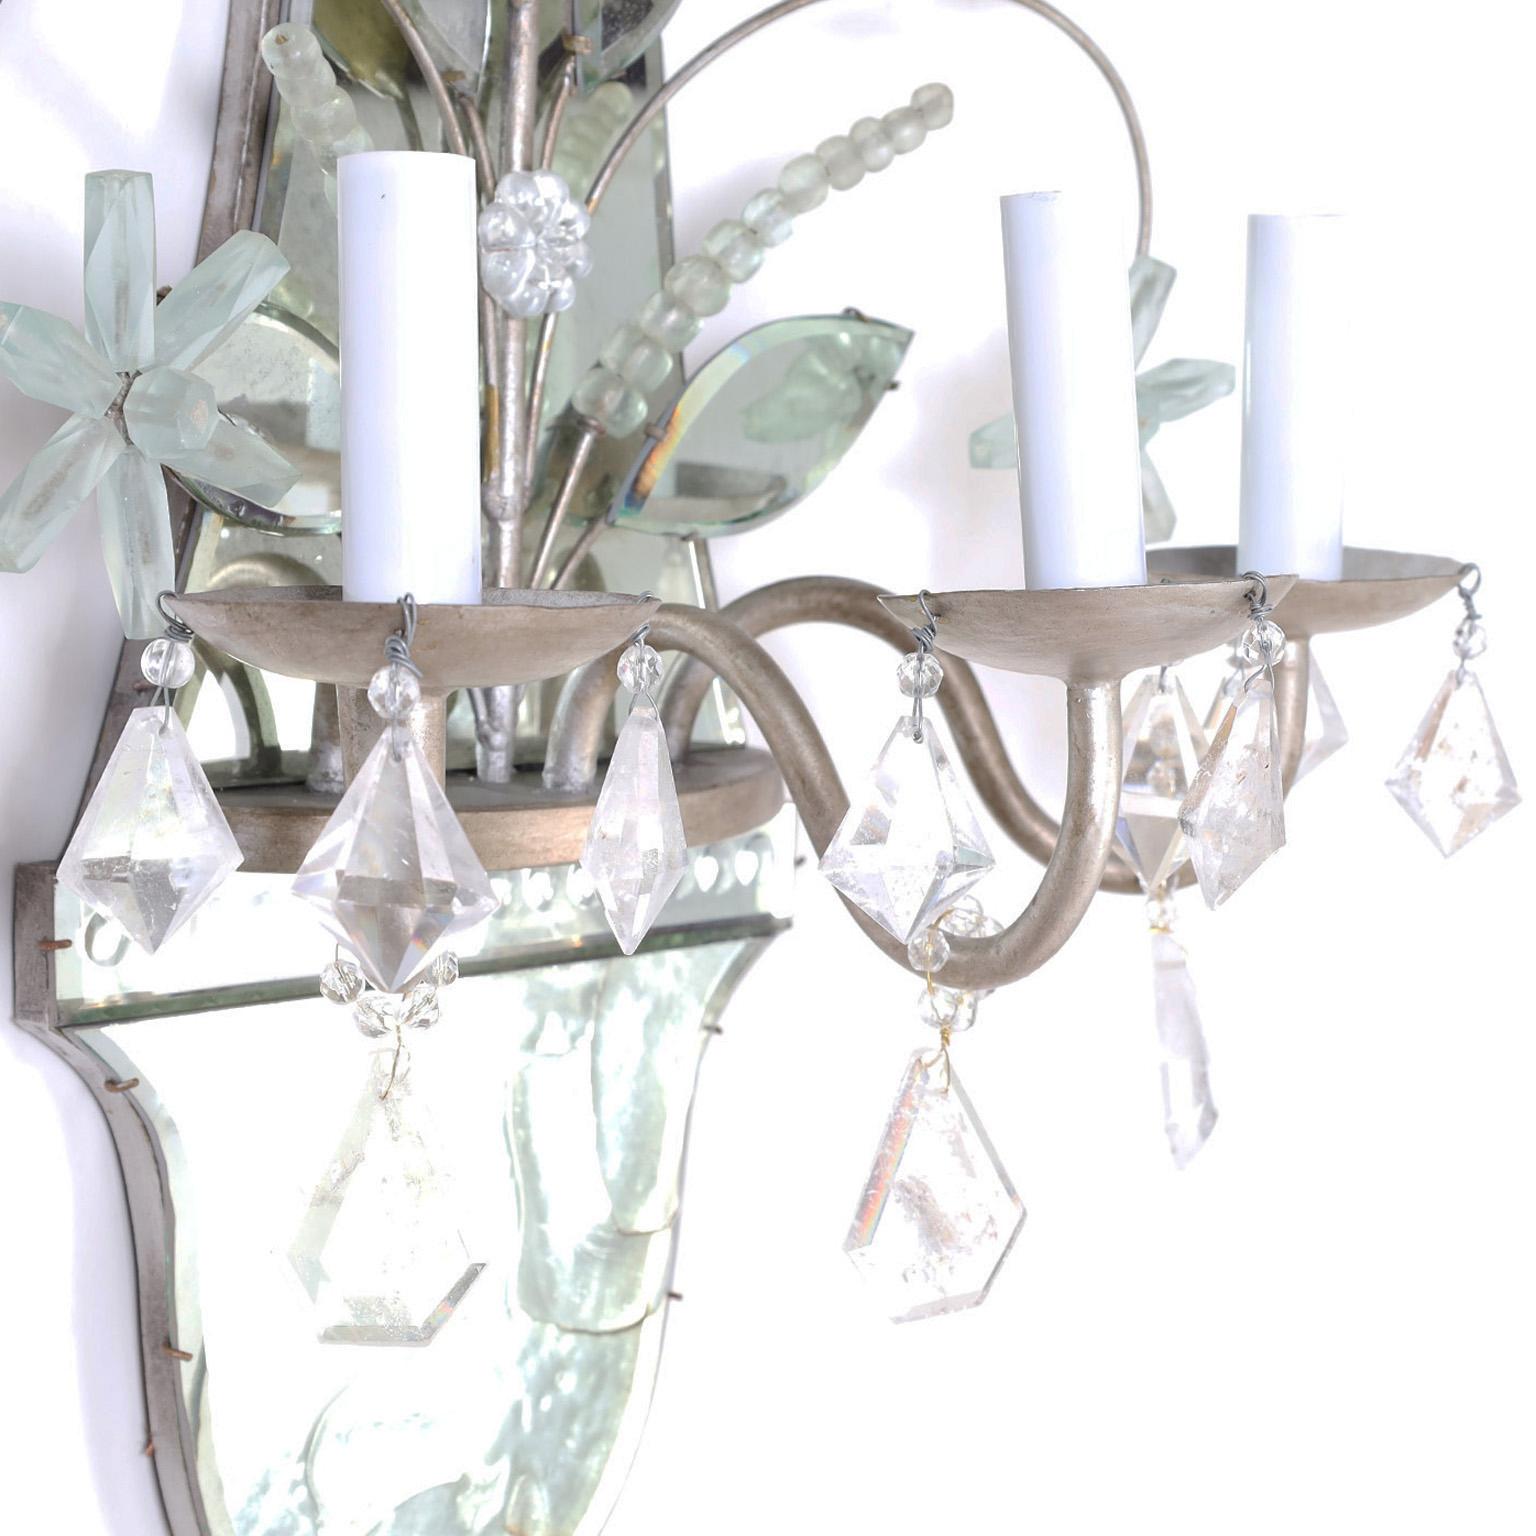 Pair of Mid-Century Italian Mirrored Wall Sconces with Rock Crystals For Sale 2